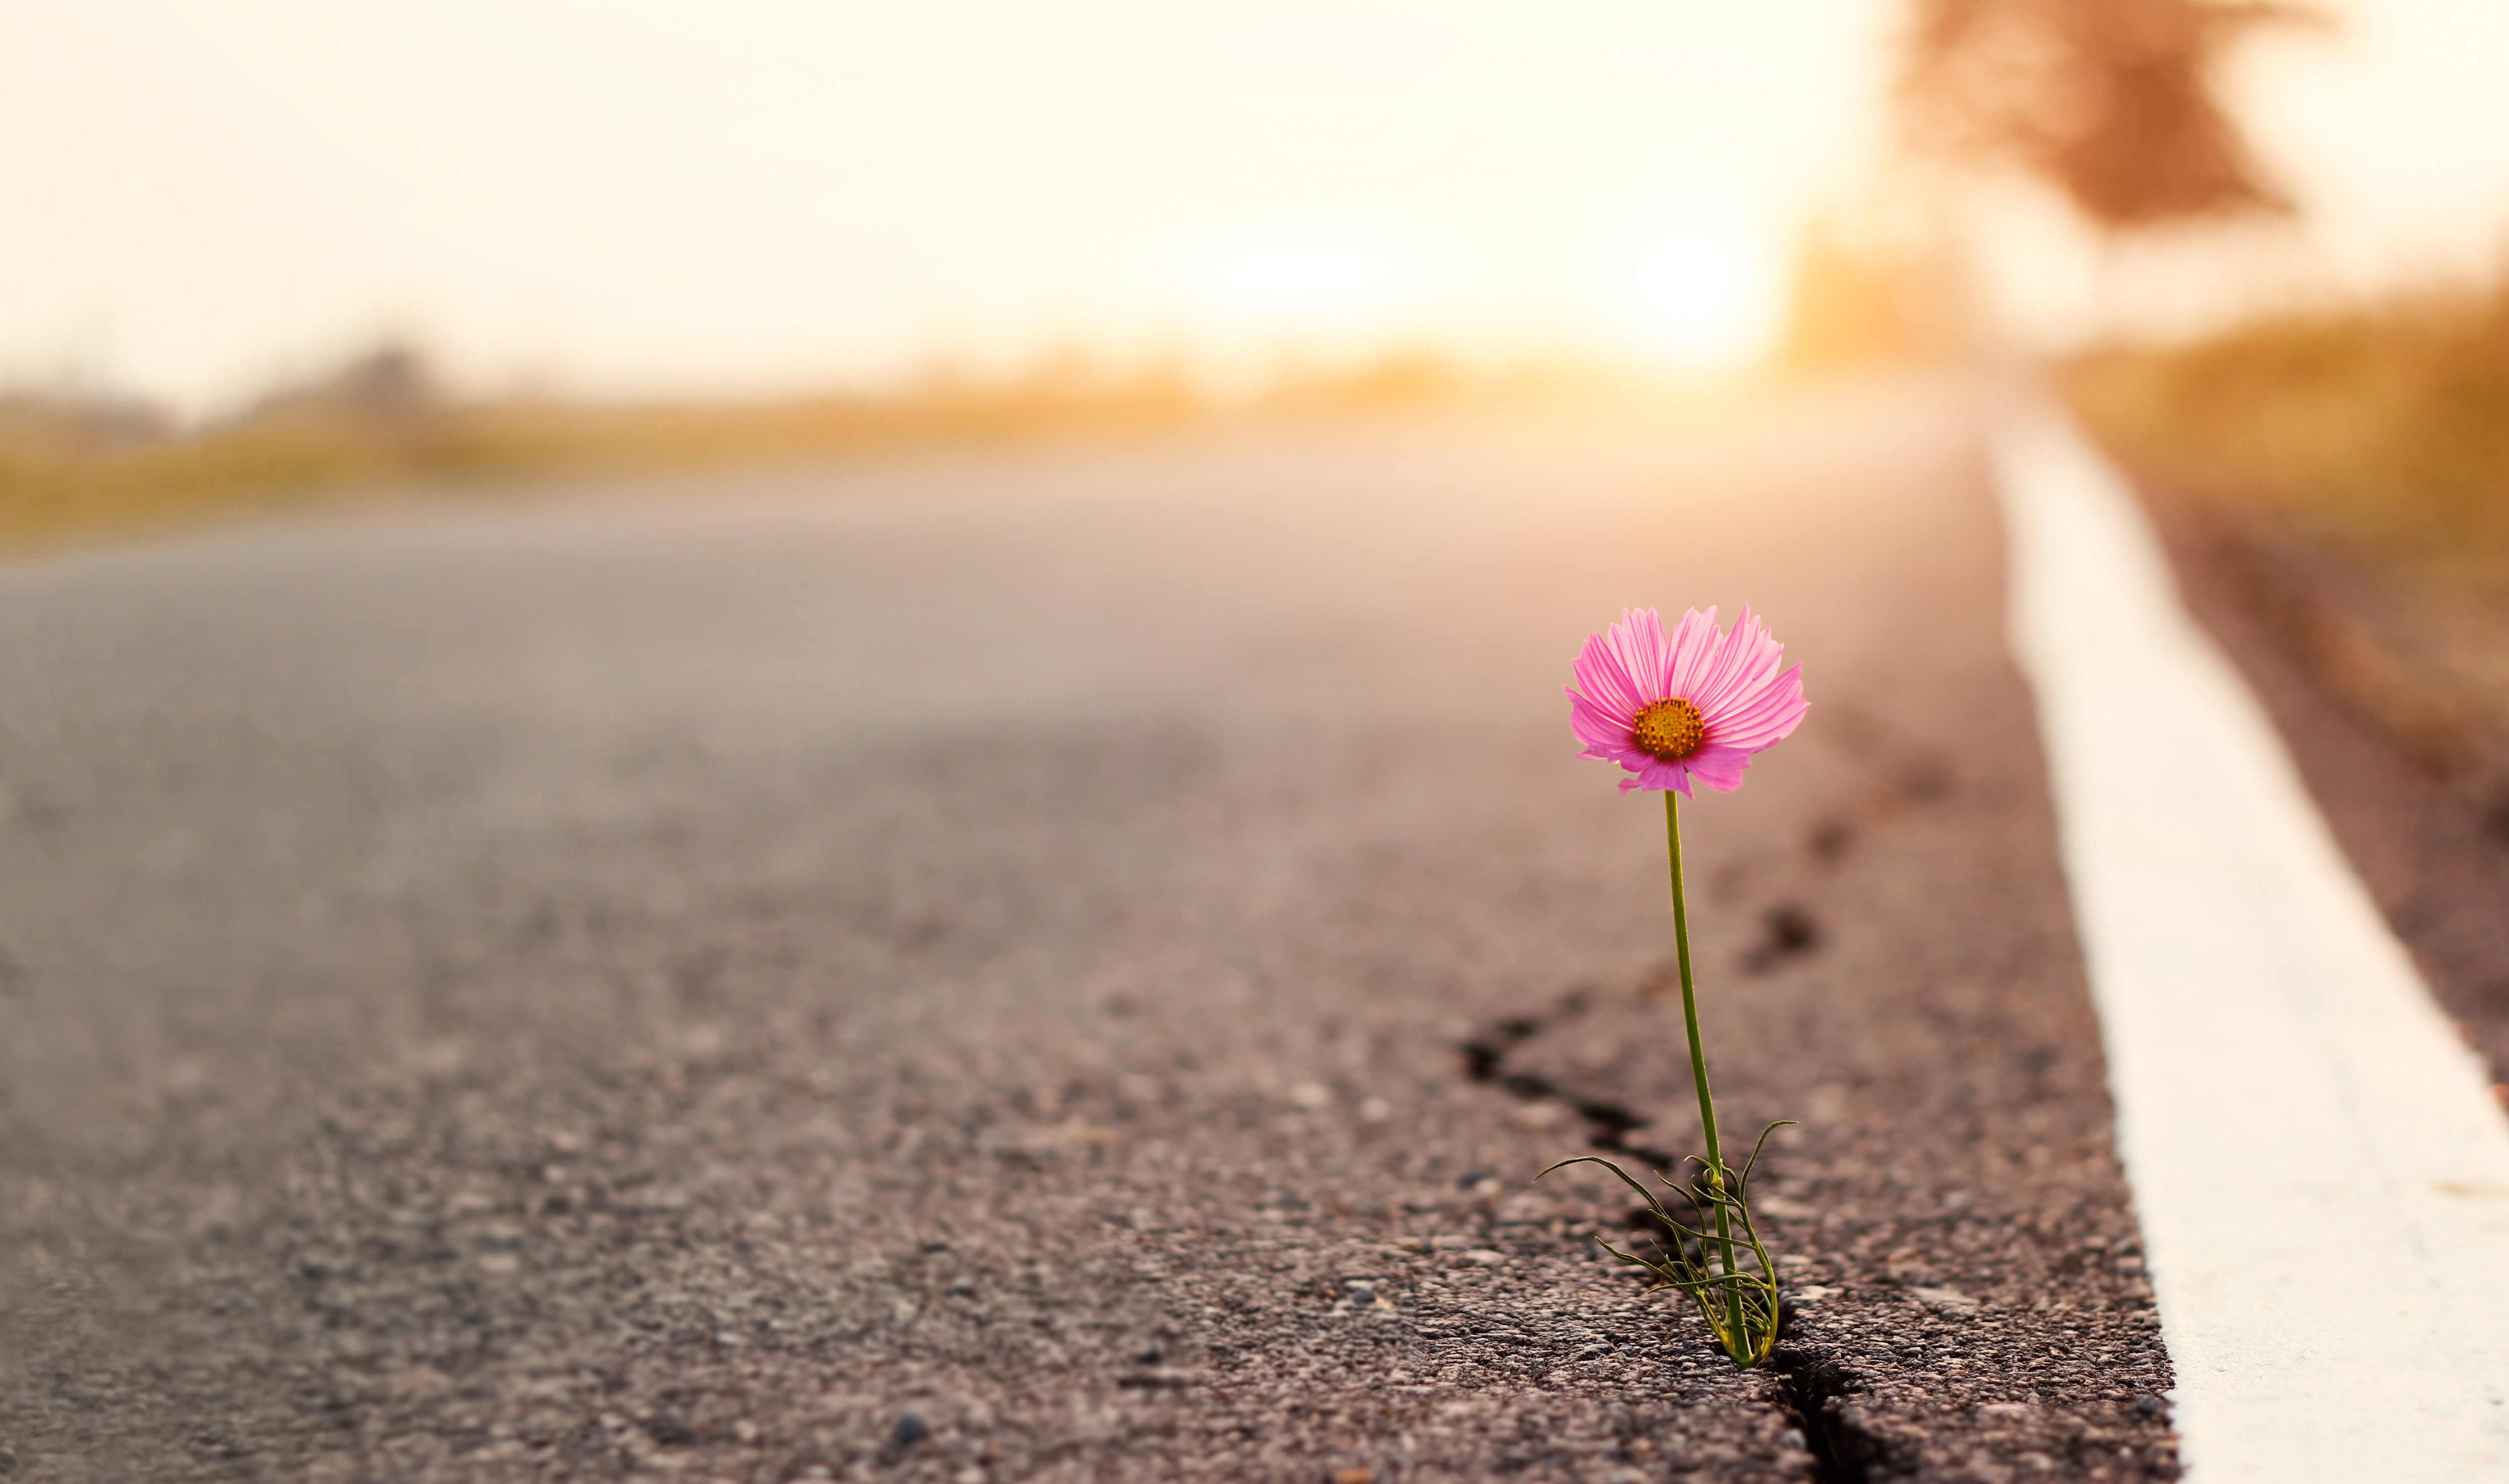 Flower growing through cracks in the road resilience